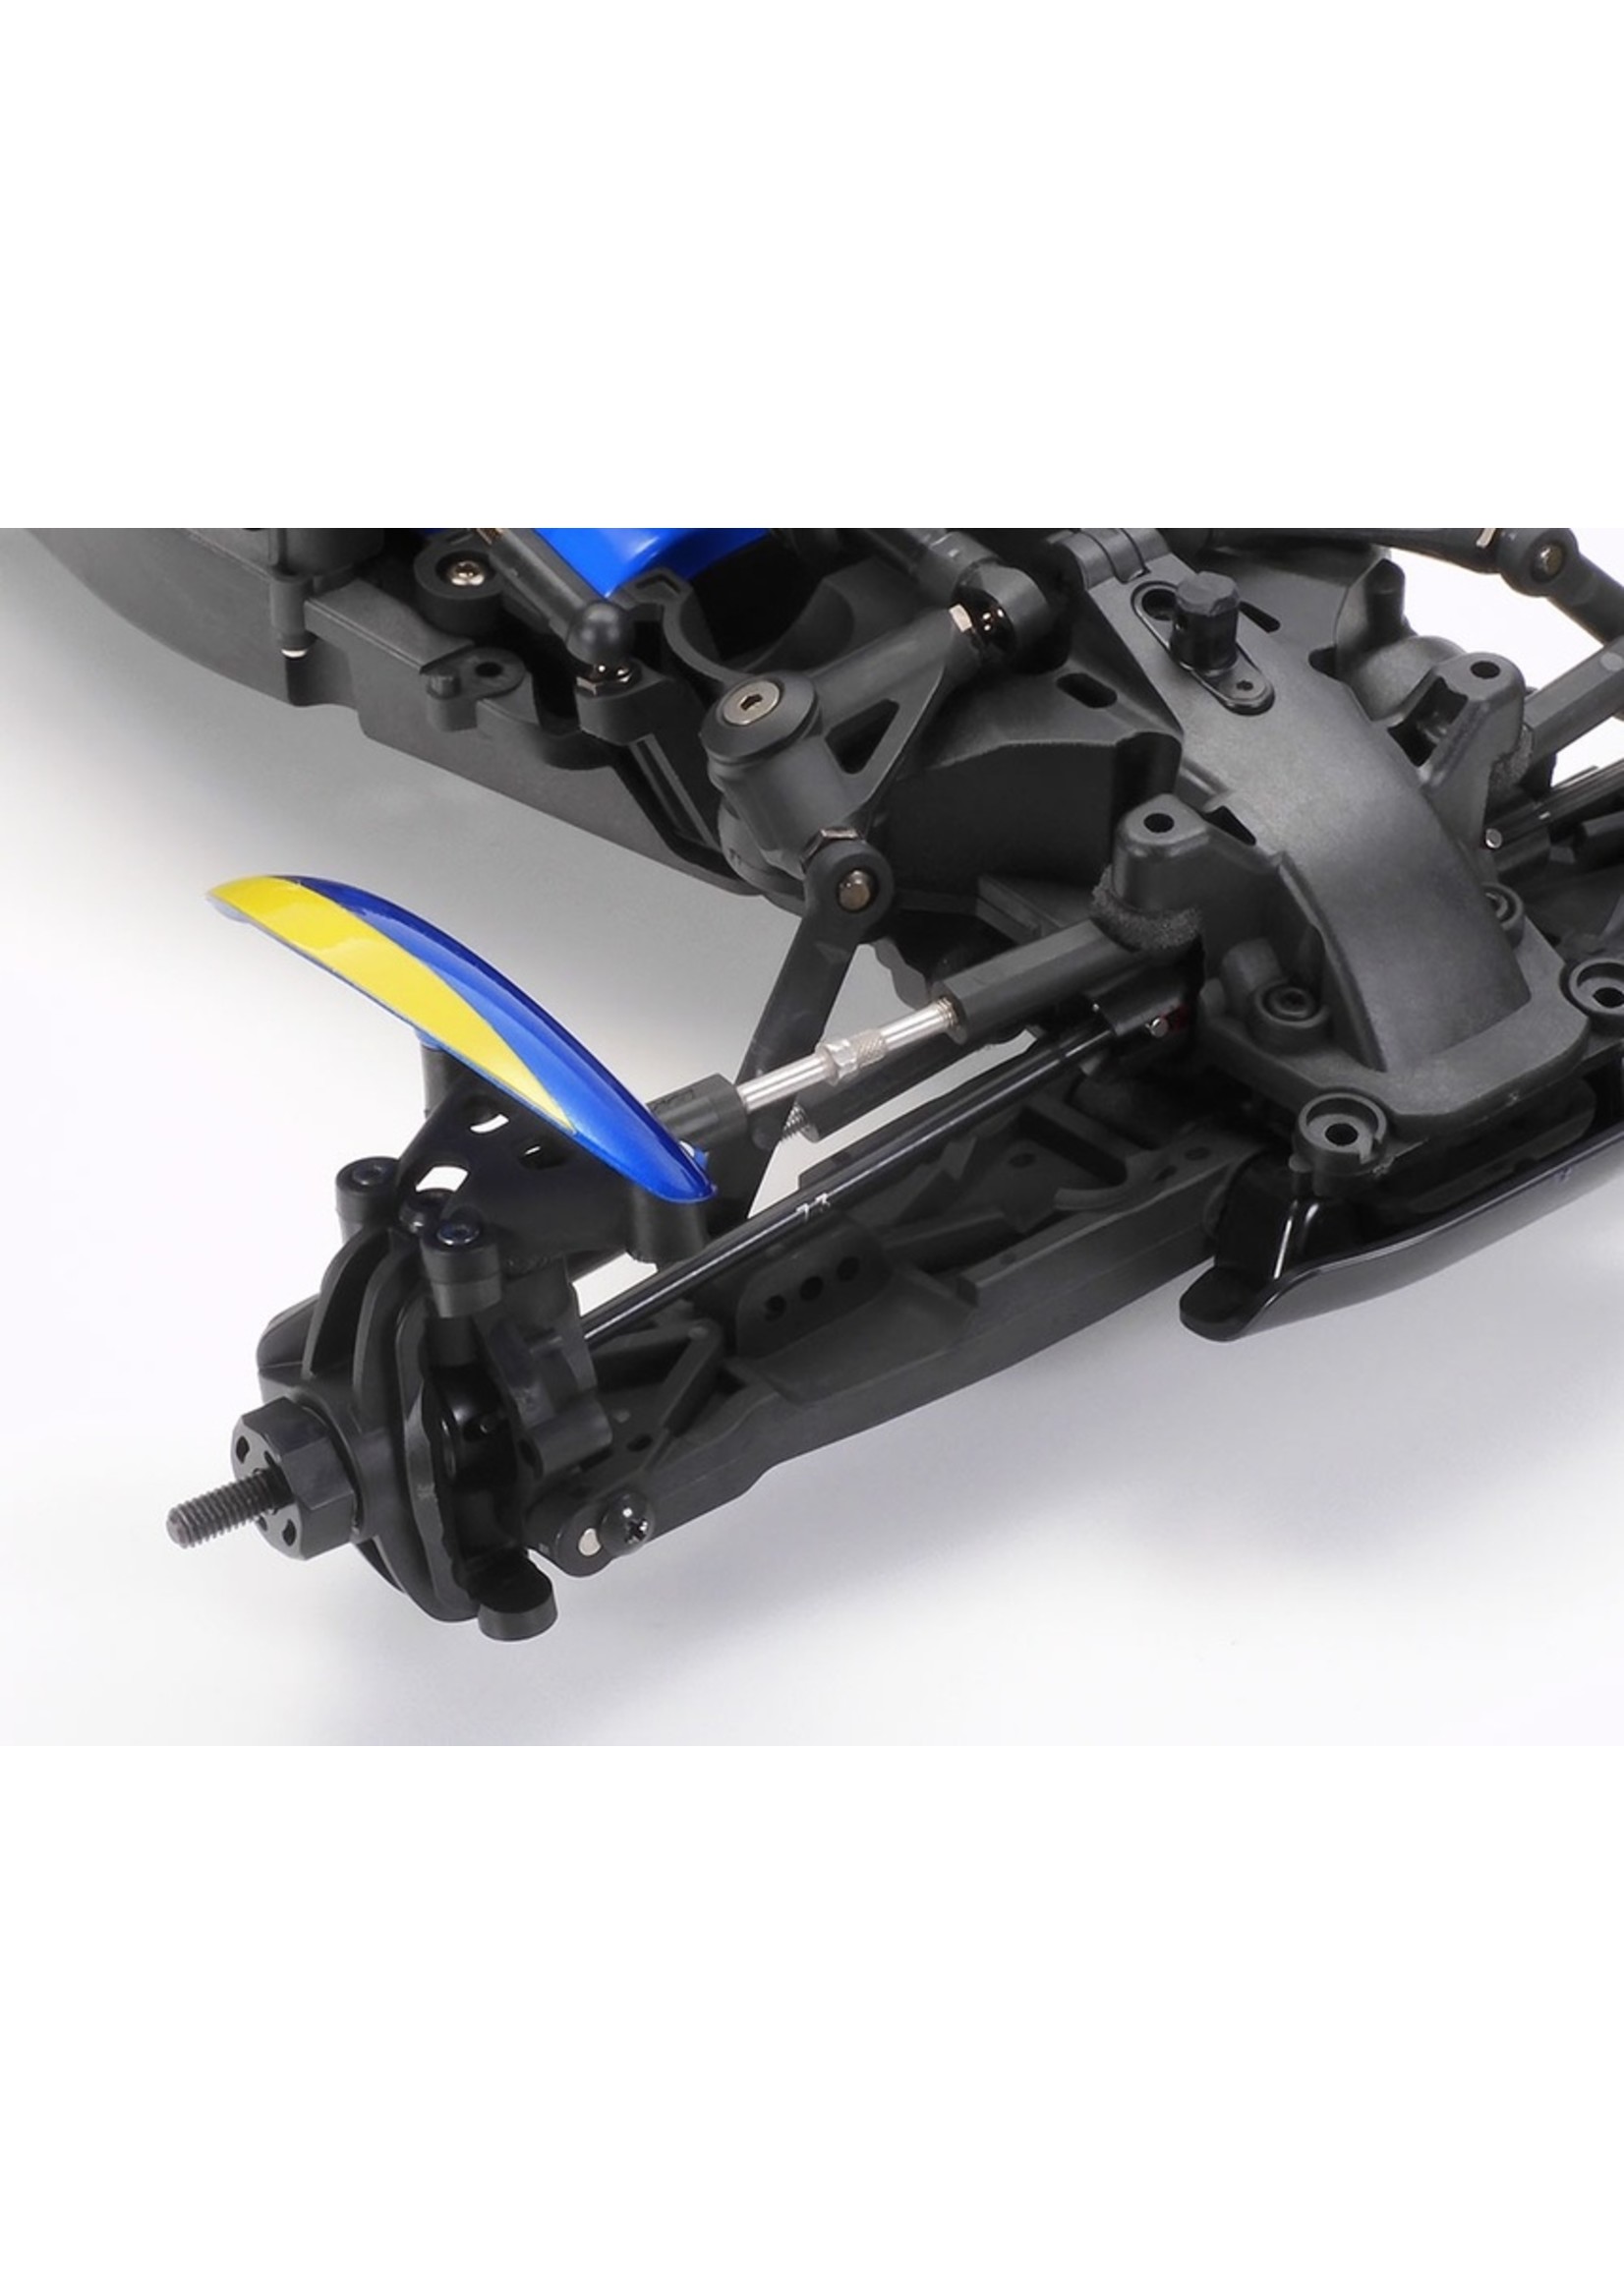 Tamiya 1/10 Super Avante Off-Road Buggy - TD4 Chassis Kit